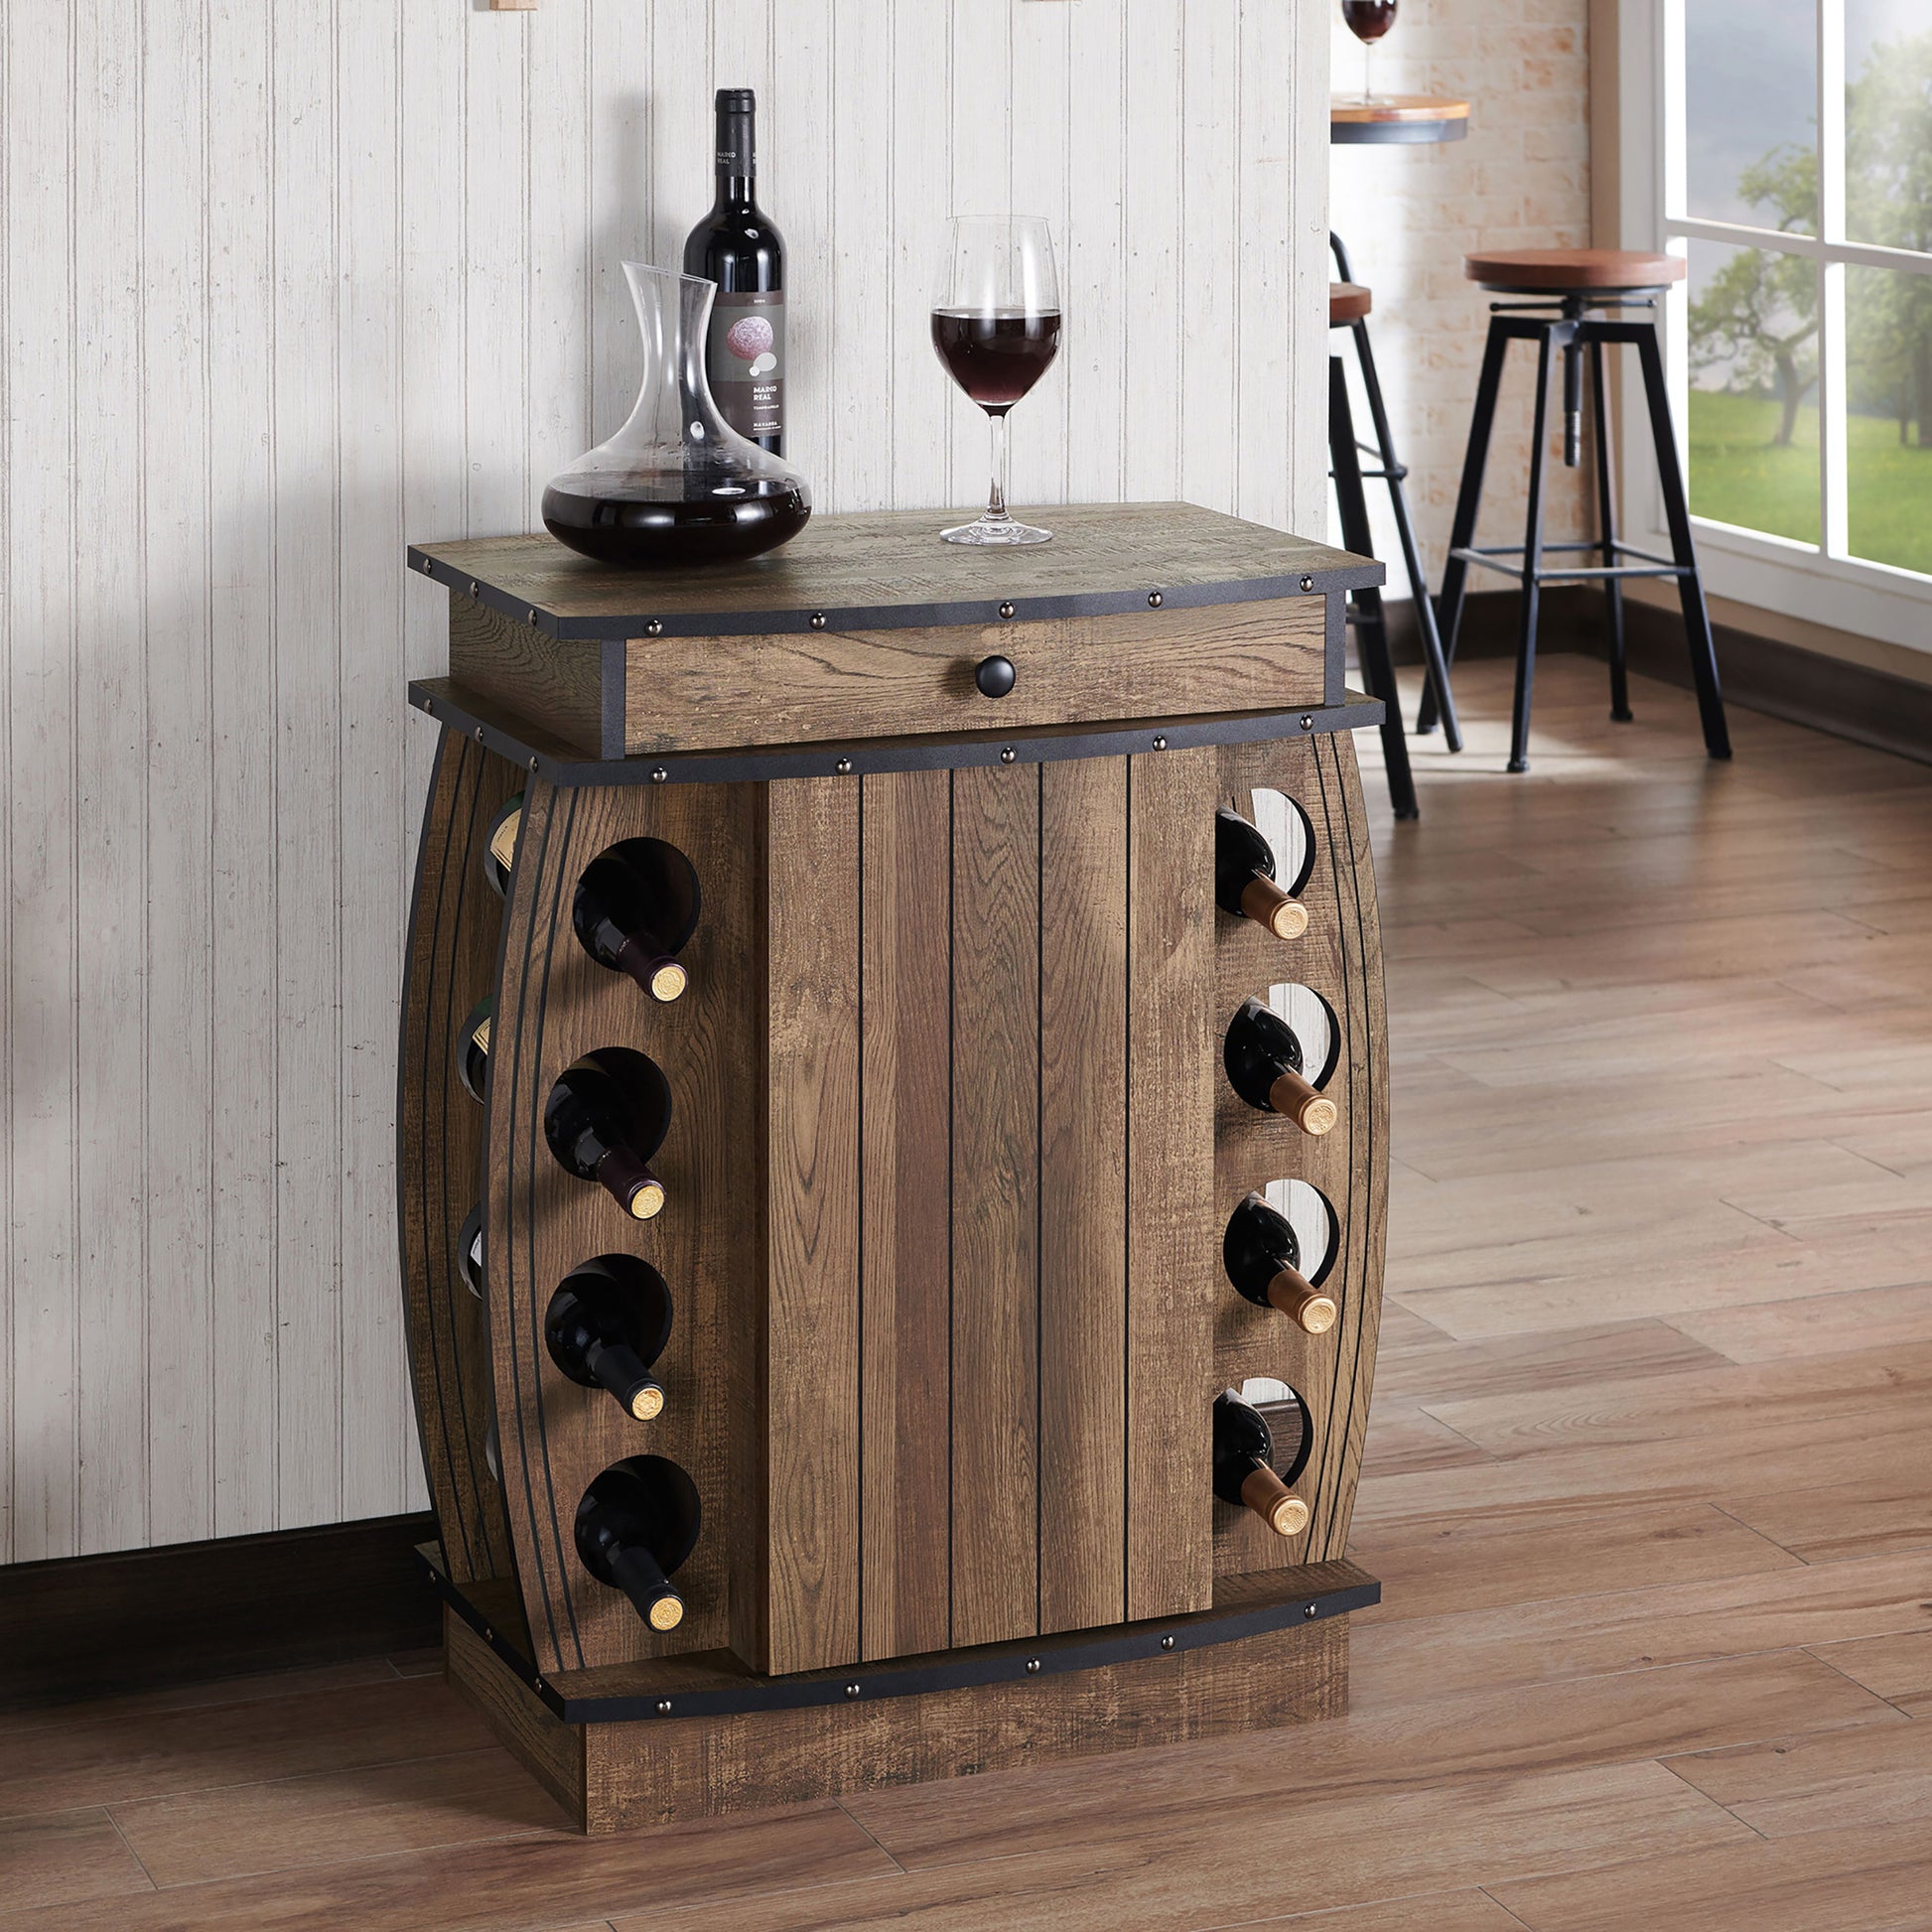 Right angled rustic reclaimed oak bar cabinet with an eight-bottle wine rack in a living area with bottles and accessories